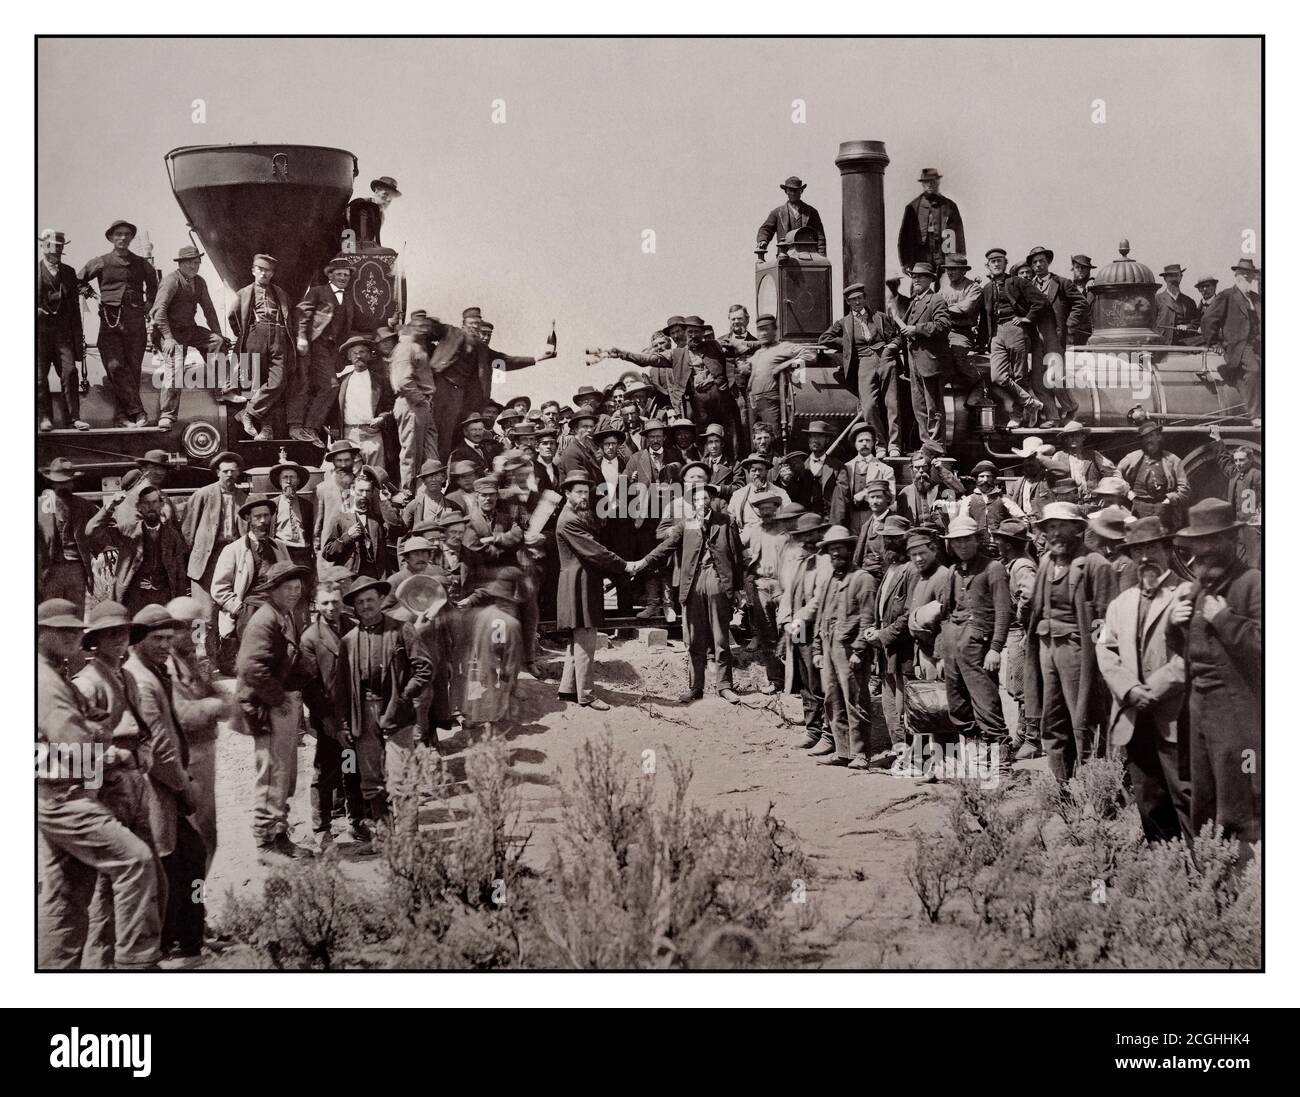 Vintage 1860's historic American railroad East and West Shaking hands at the historic moment of final laying of last rail to join up the Union Pacific Railroad  from East to West- America USA The ceremony for the driving of the 'Last Spike' at Promontory Summit, Utah, May 10, 1869 The First Transcontinental Railroad was a 1,912-mile continuous railroad line constructed between 1863 and 1869 that connected the existing eastern U.S. rail network at Council Bluffs, Iowa with the Pacific coast at the Oakland Long Wharf on San Francisco Bay. California USA Stock Photo